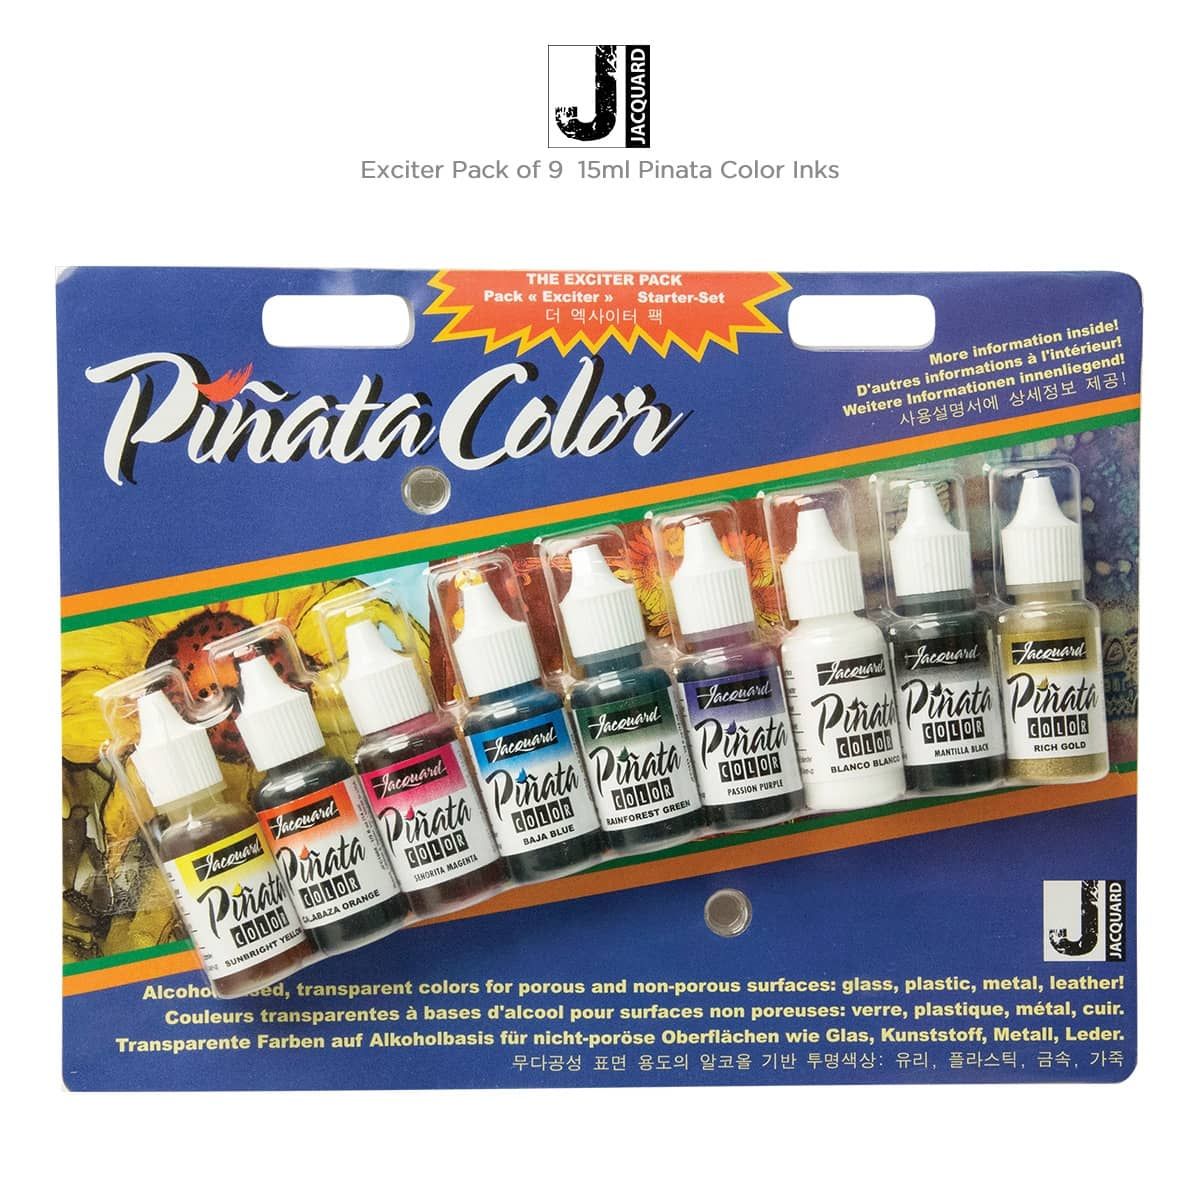 Jacquard Piñata Inks Exciter Pack of 9 15ml Ink Colors